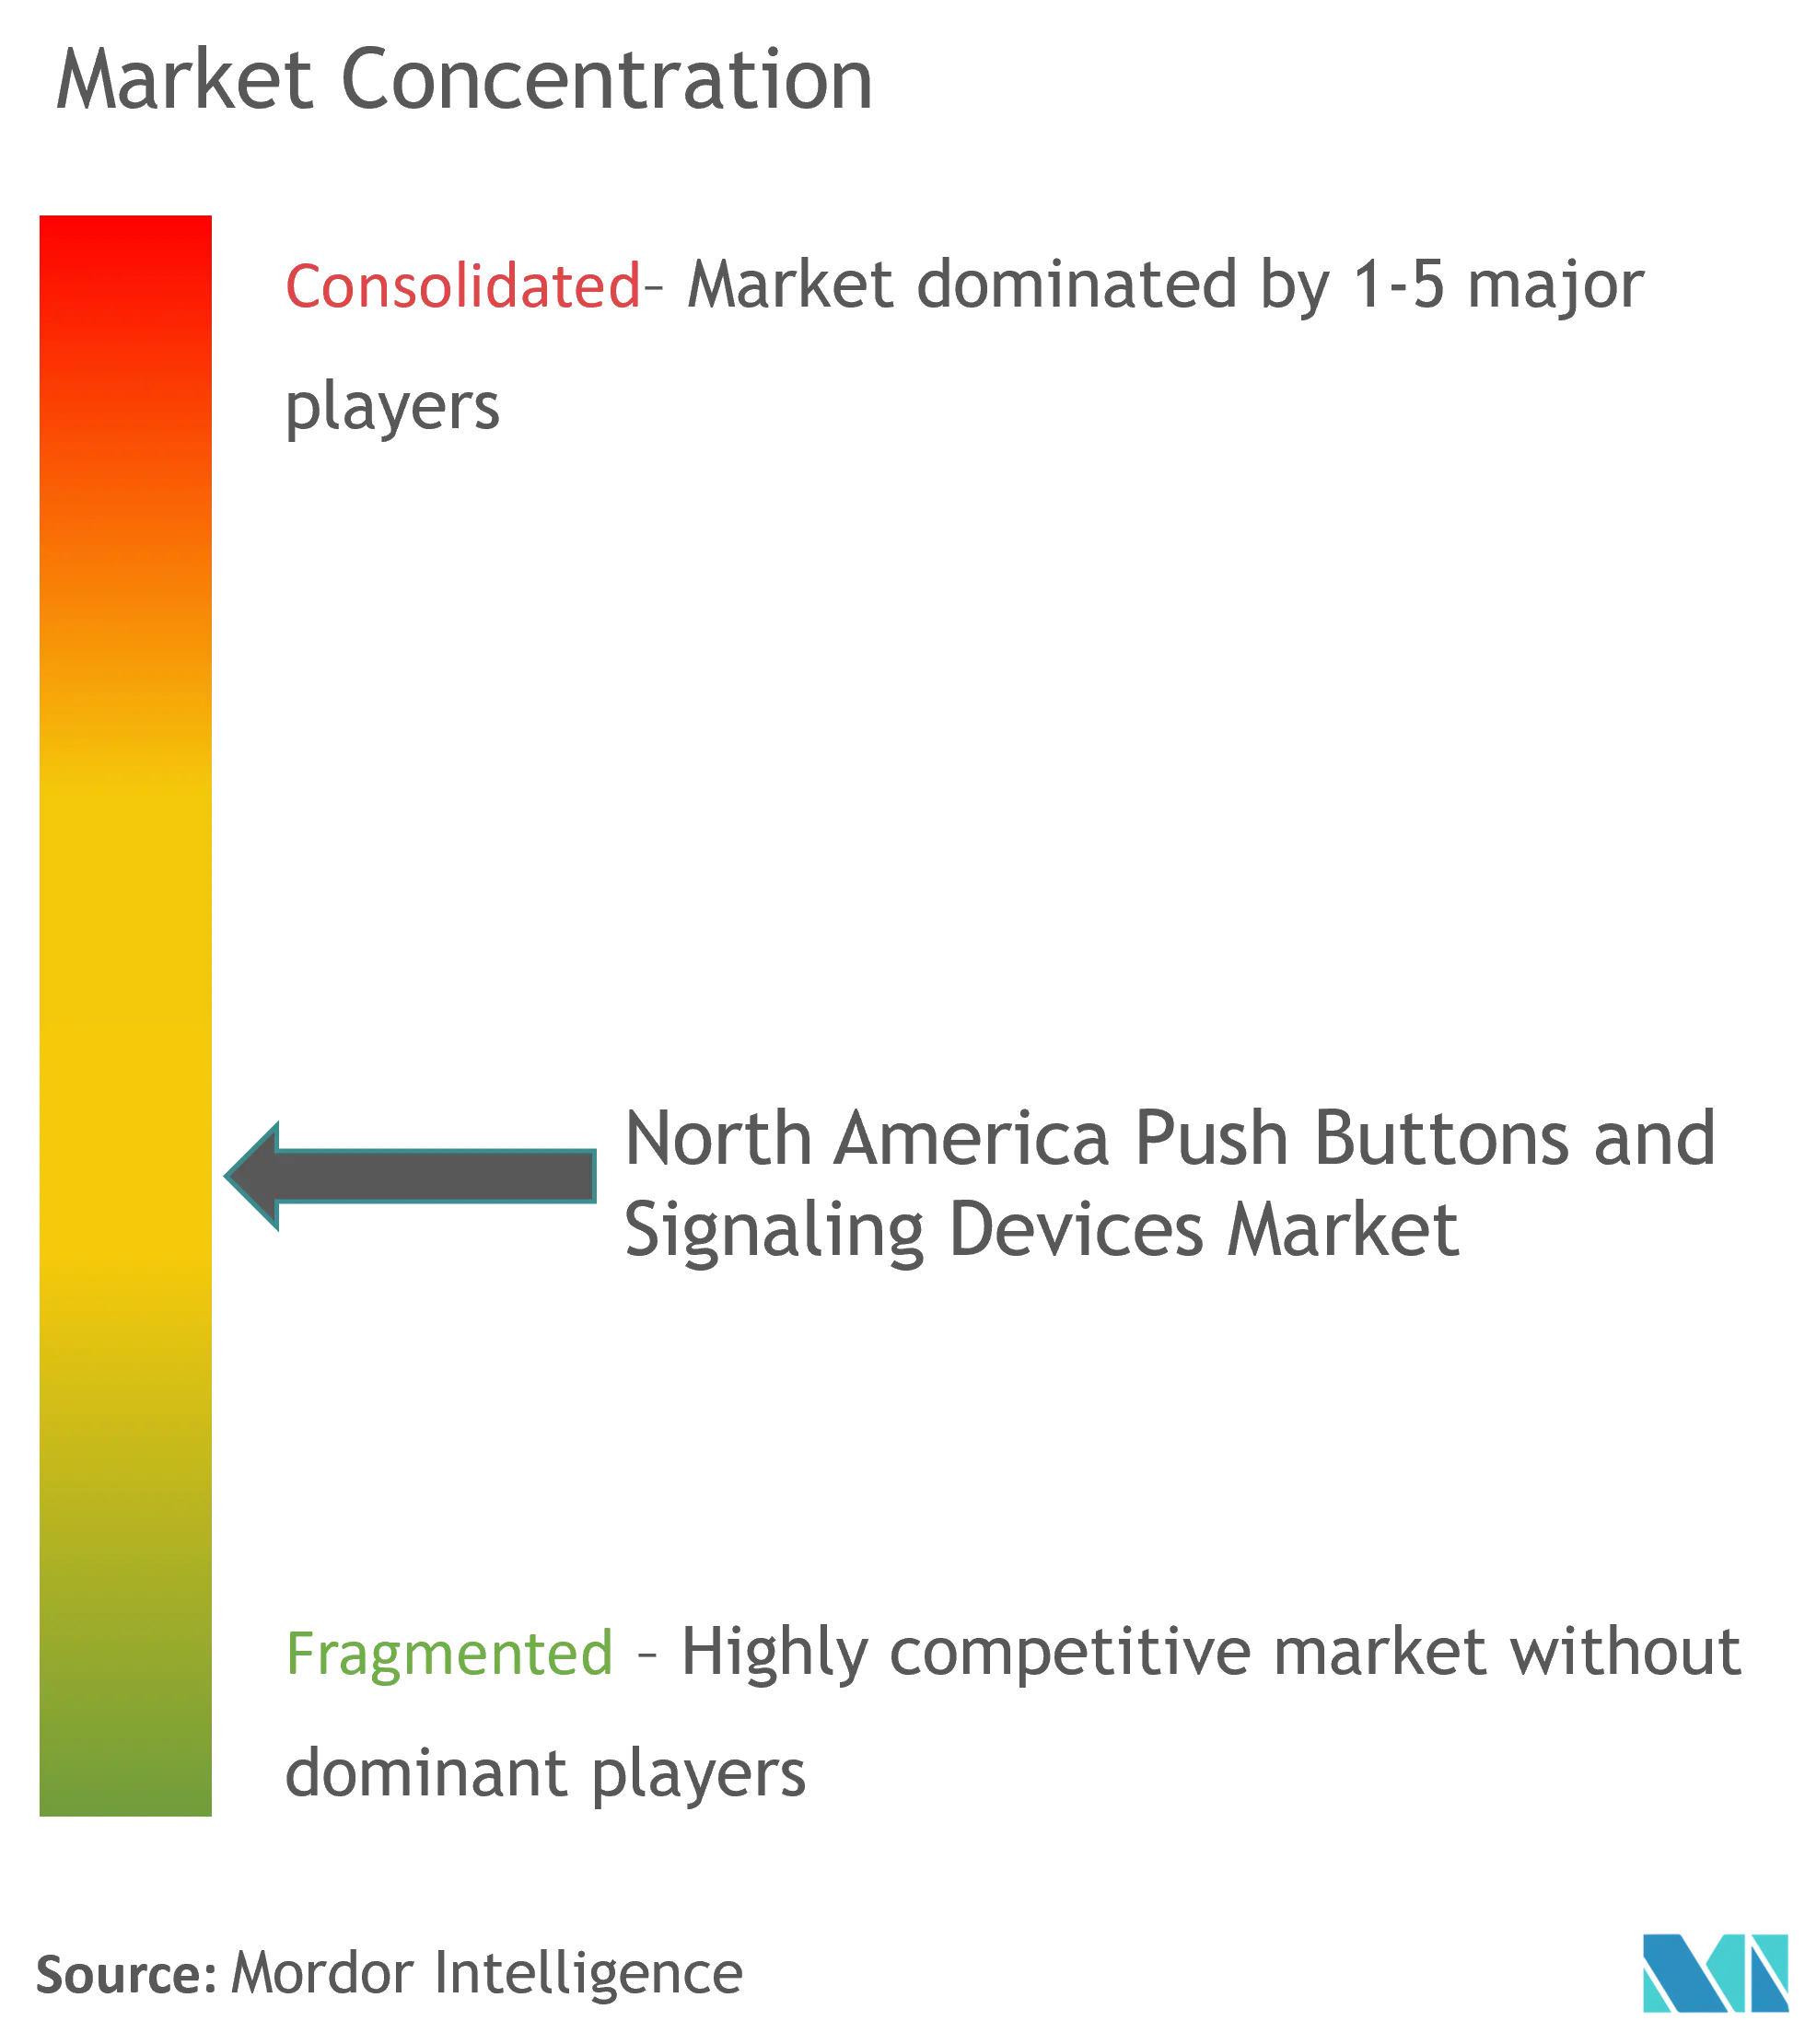 North America Push Buttons  and Signaling Devices Market